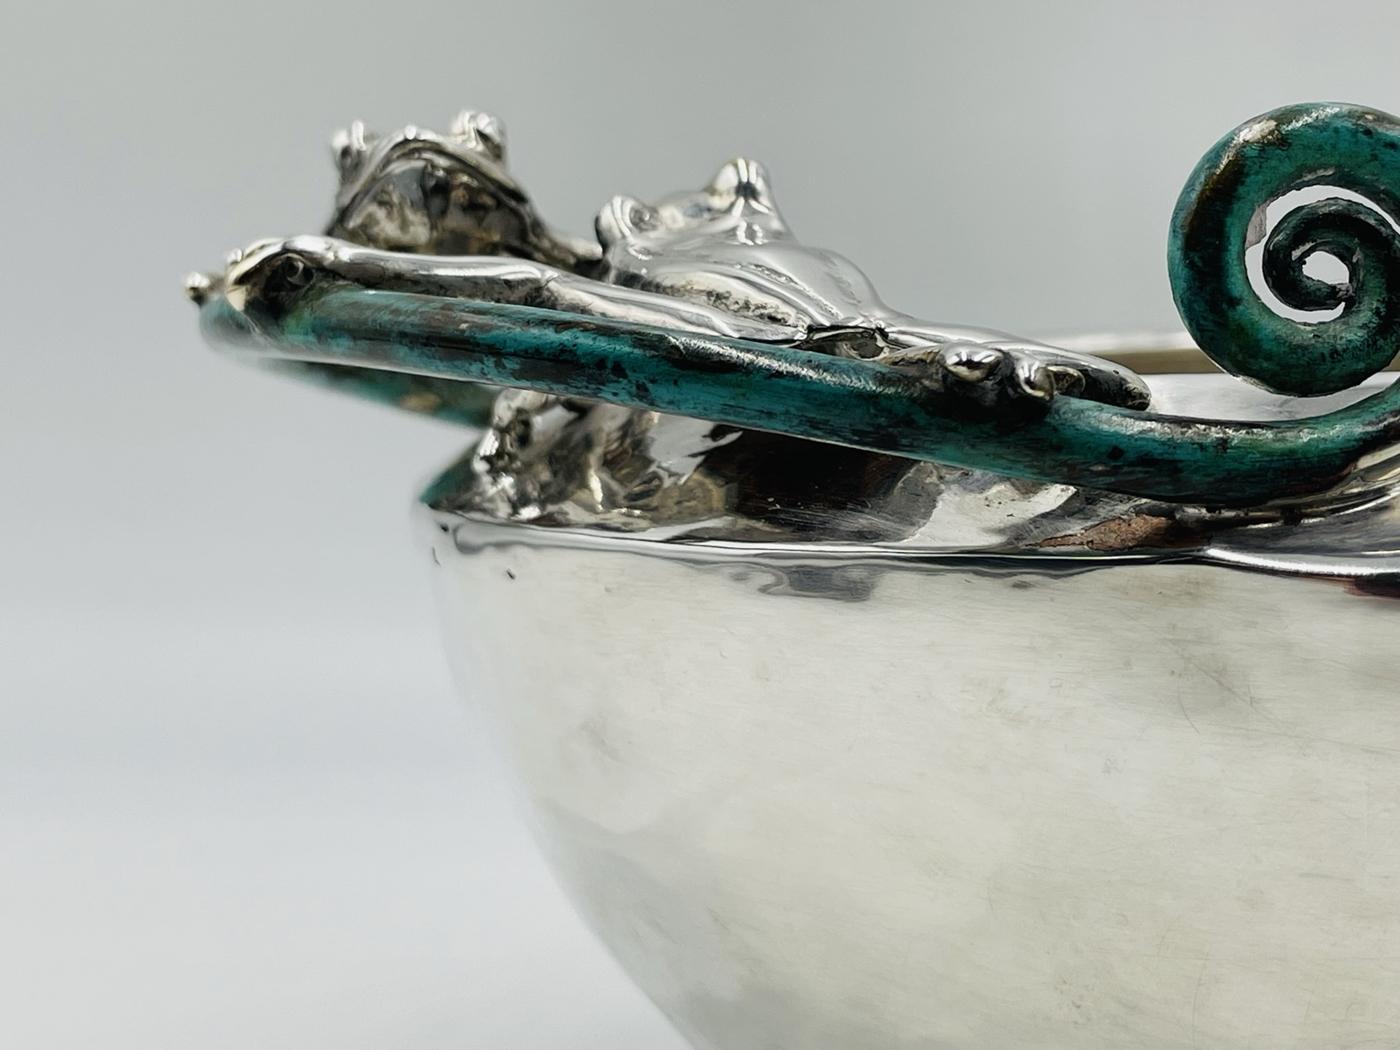 Contemporary Large Silver-Plated Bowl With Frogs Handles by Emilia Castillo, Mexico 21st Cent For Sale